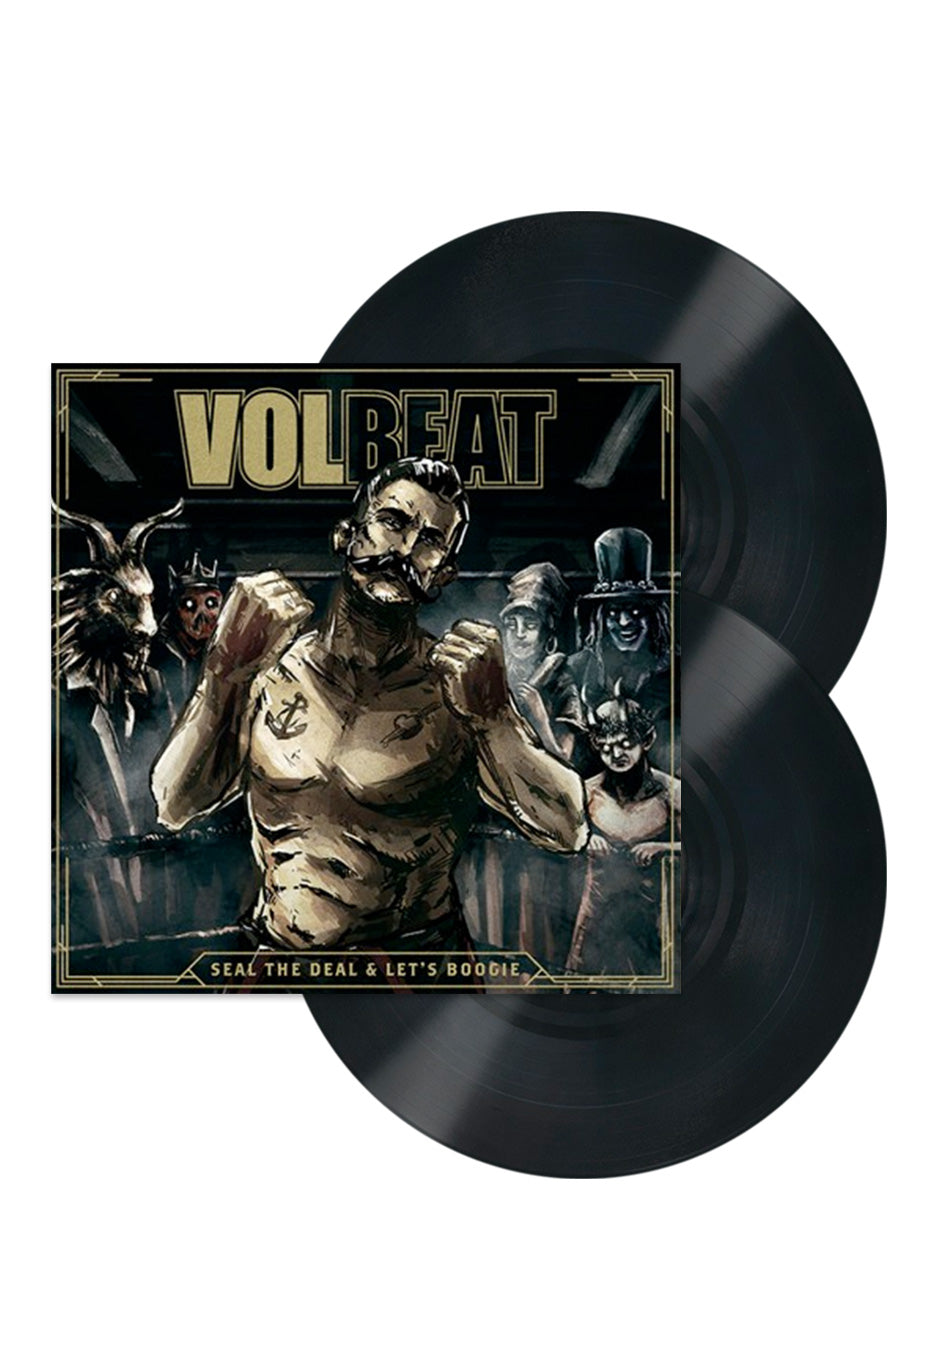 Volbeat - Seal The Deal & Let's Boogie - 2 Vinyl + CD